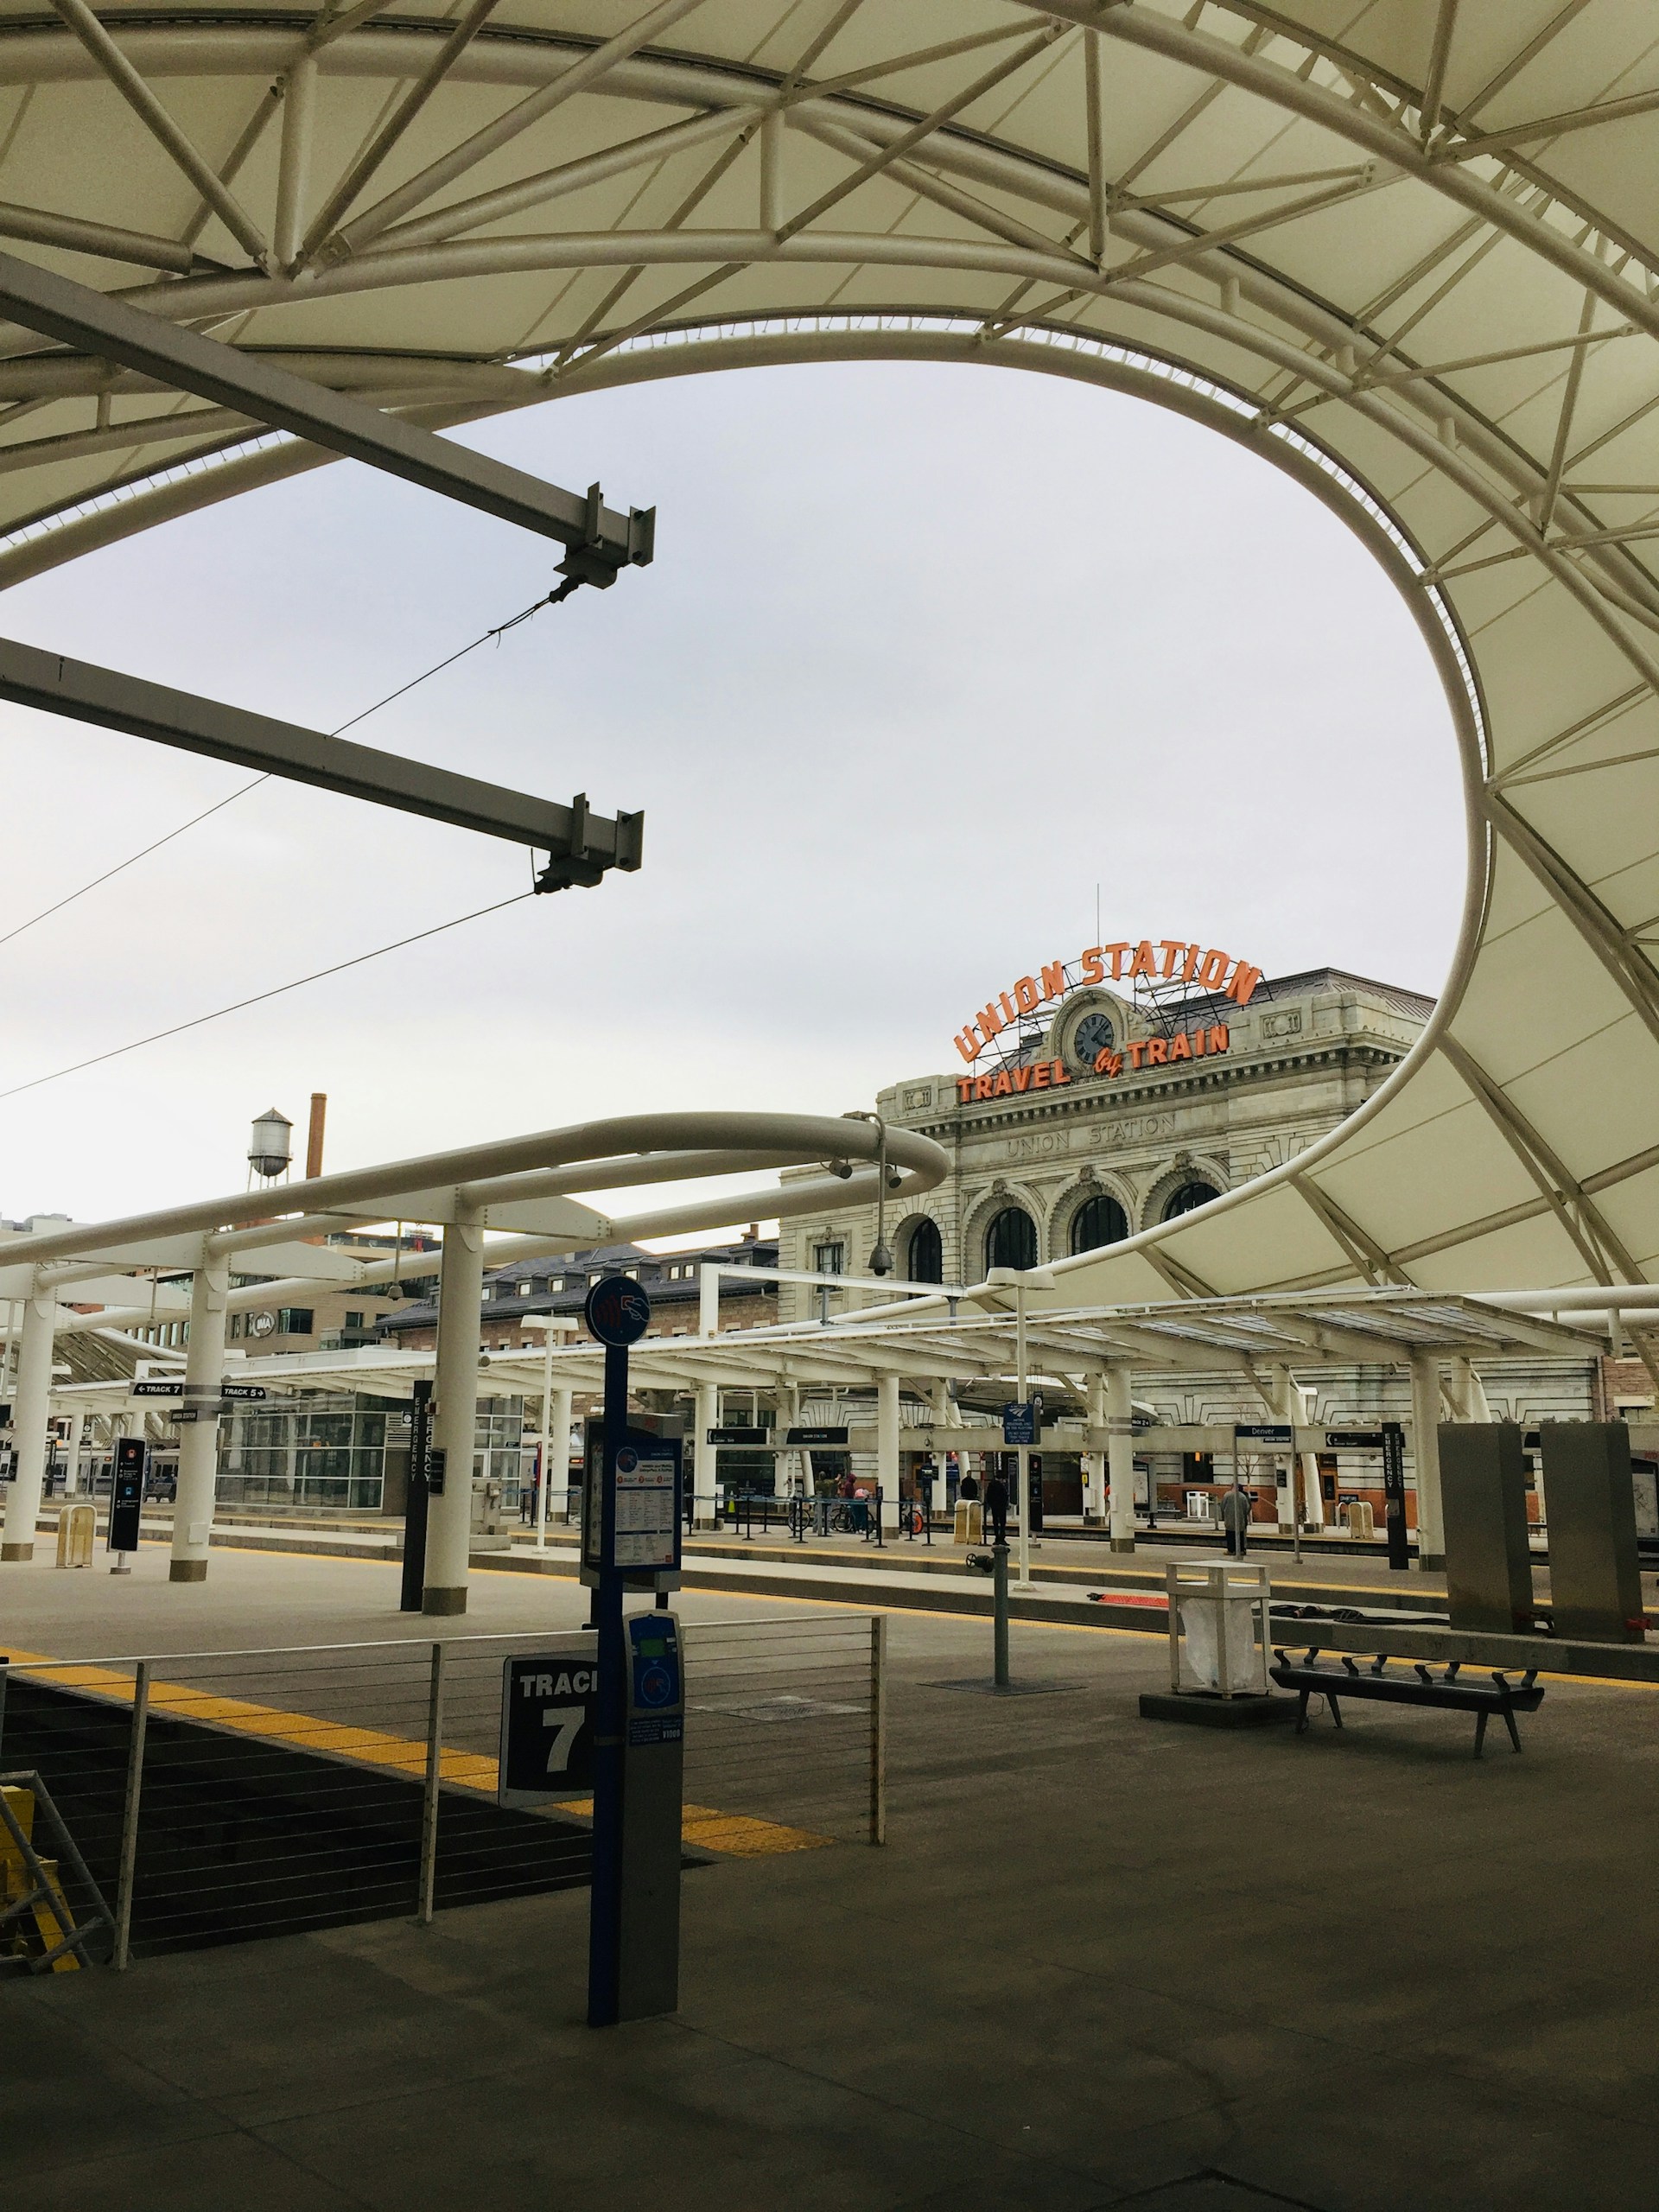 CBS Denver Cameraman Assaulted at Union Station While Doing Story on Crime